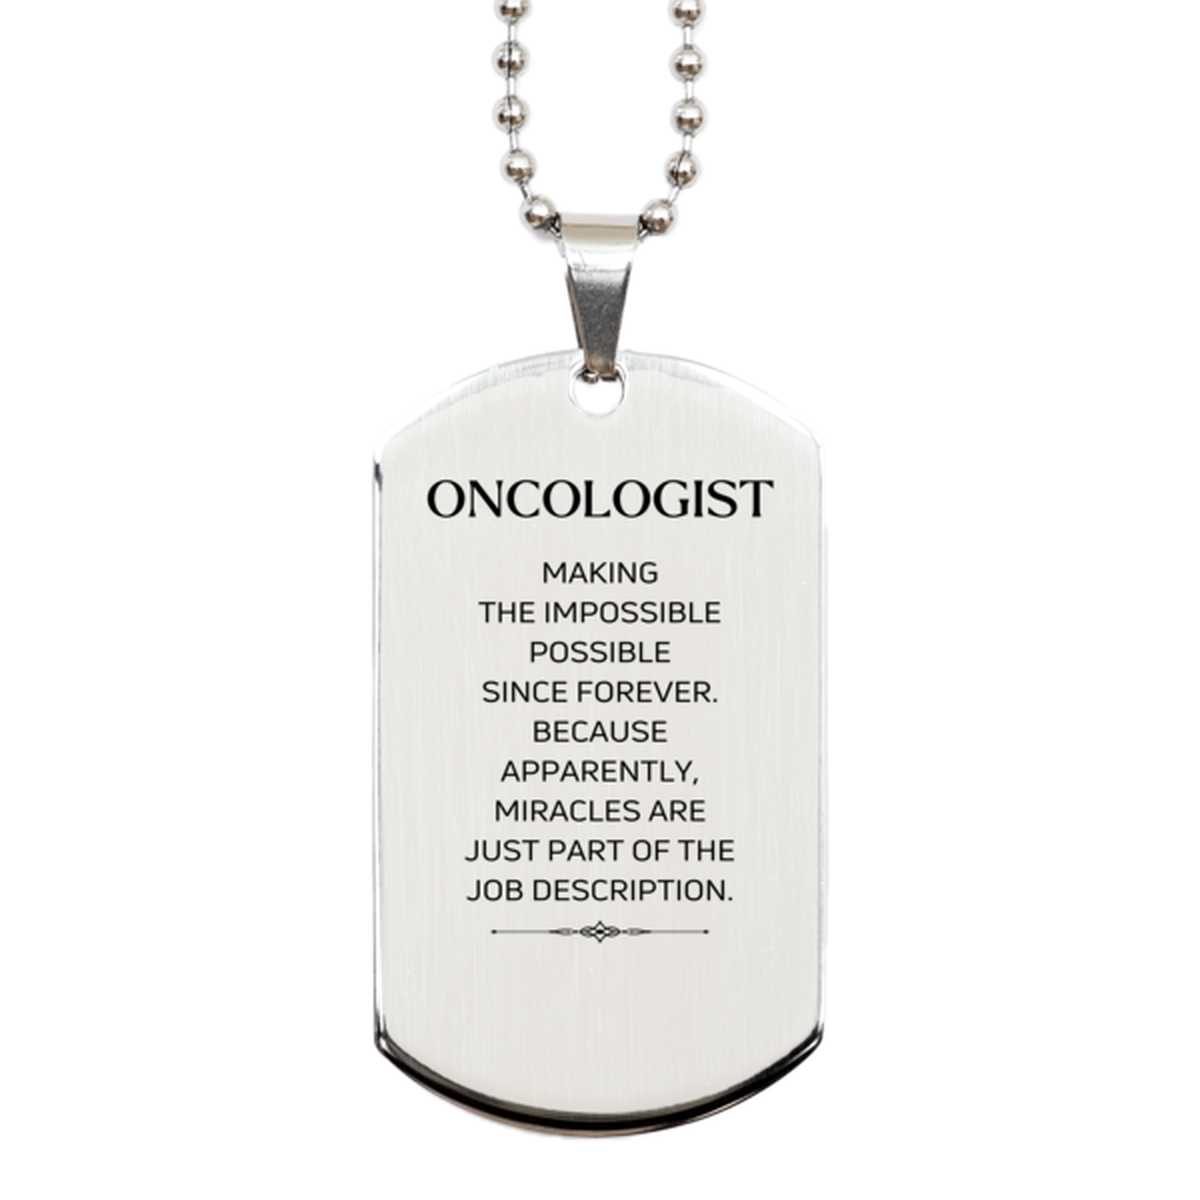 Funny Oncologist Gifts, Miracles are just part of the job description, Inspirational Birthday Silver Dog Tag For Oncologist, Men, Women, Coworkers, Friends, Boss